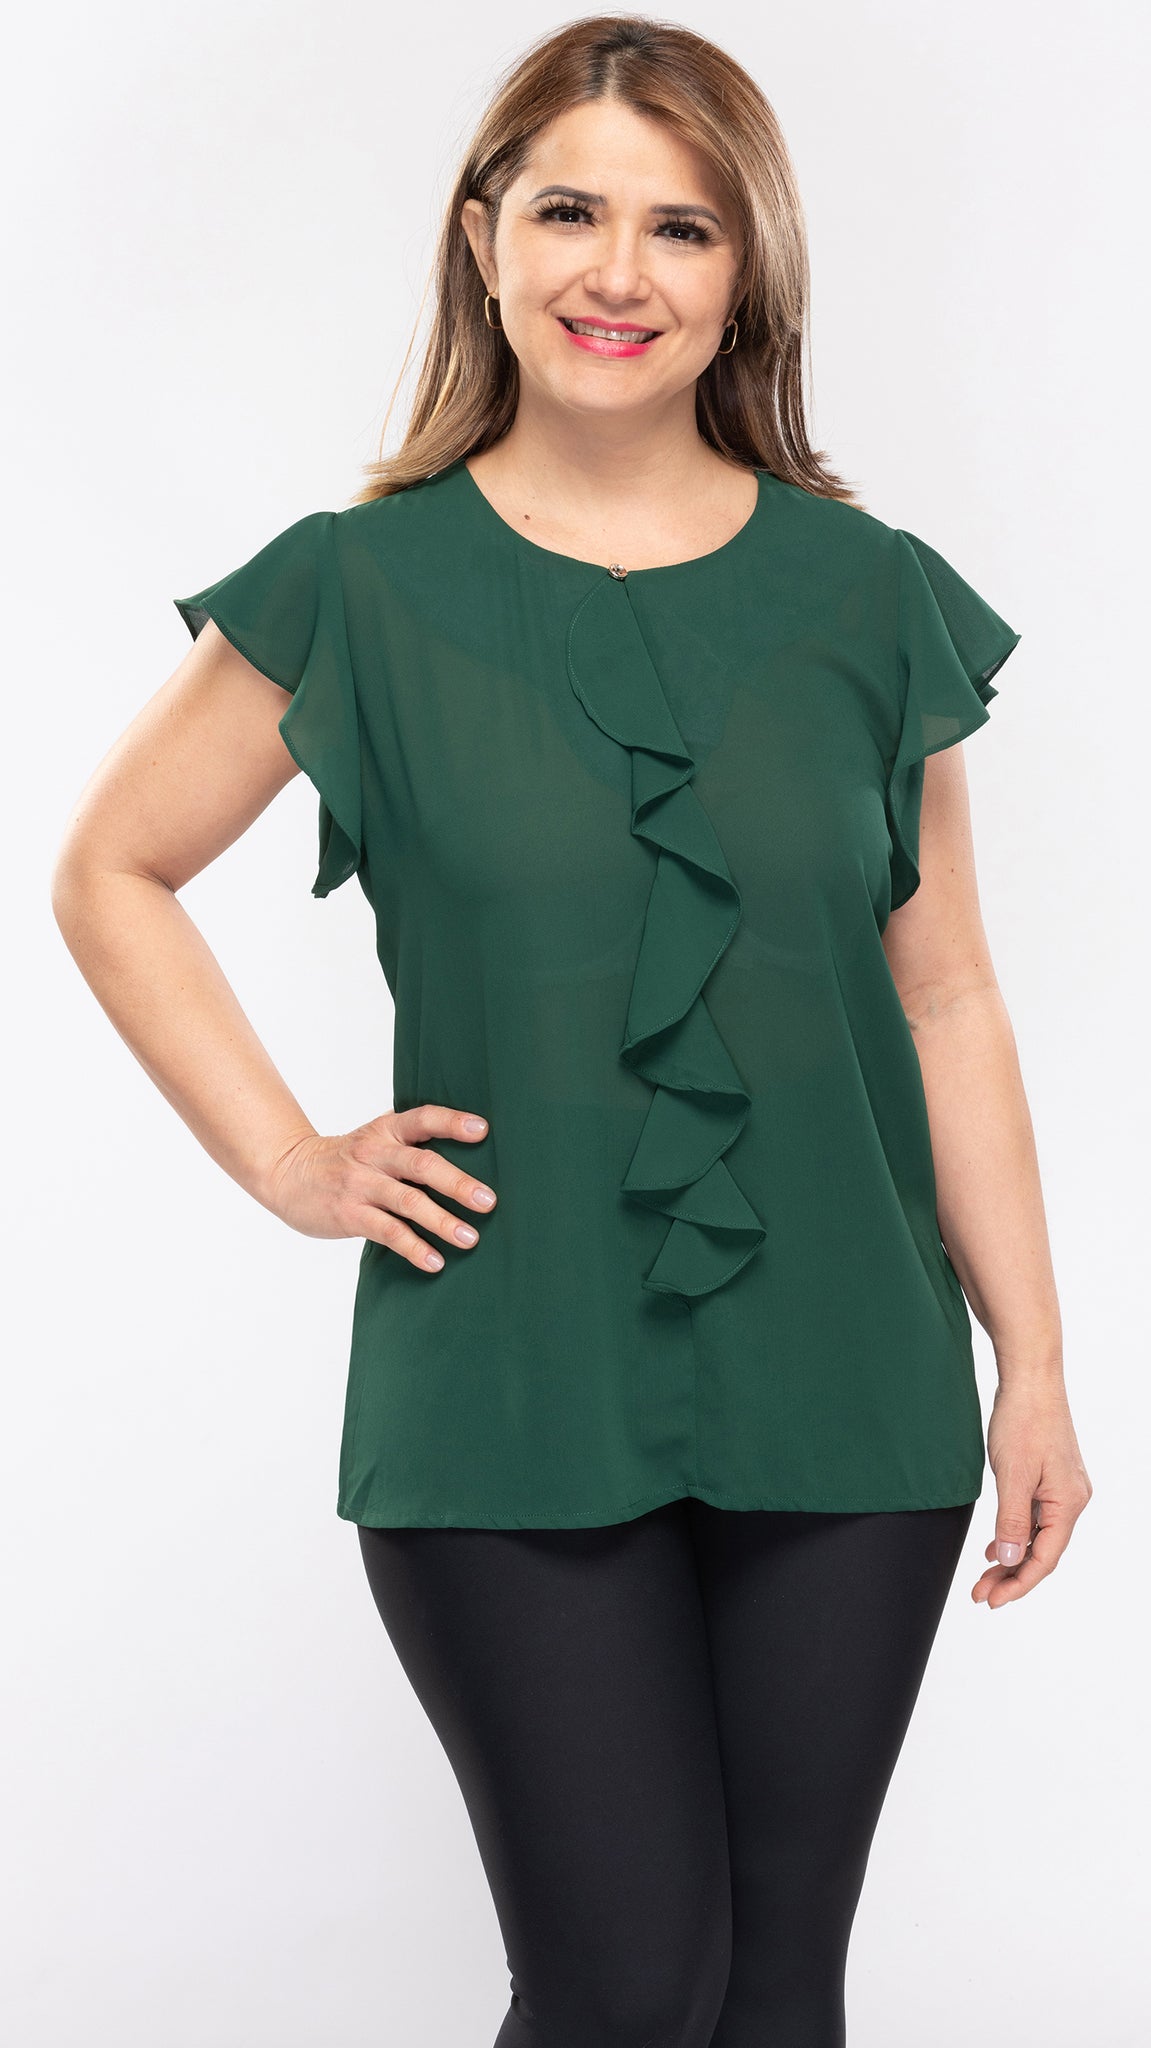 Women's Top w/Front Frill-2 Colors/3 Sizes-12pcs/pack ($9.90/pc) OR 6pcs/pack ($11.90/pc)